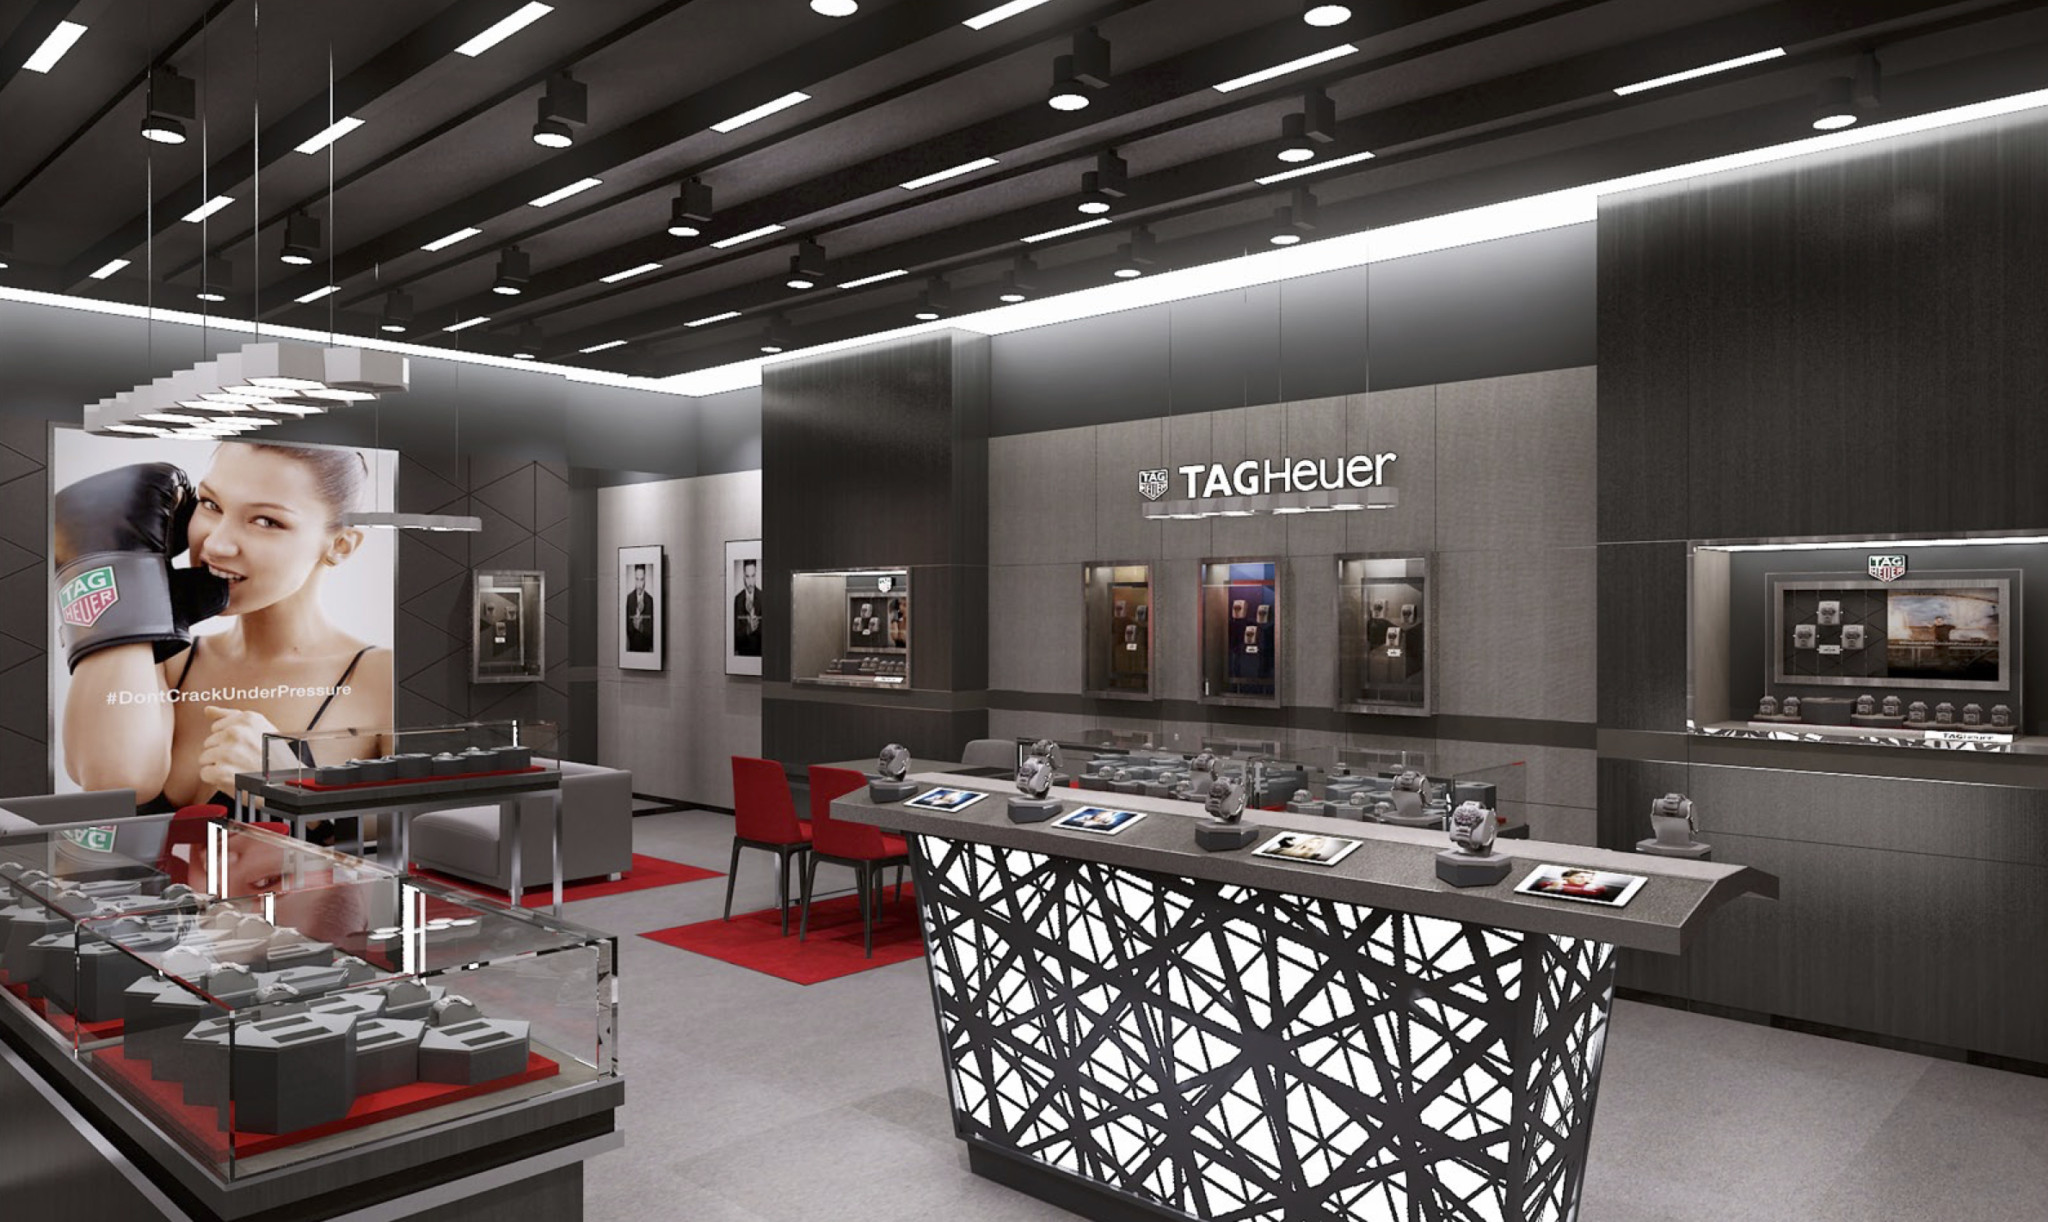 Aurum holdings opened a monobrand tag heuer boutique in sheffield's meadowhall shopping centre this year.